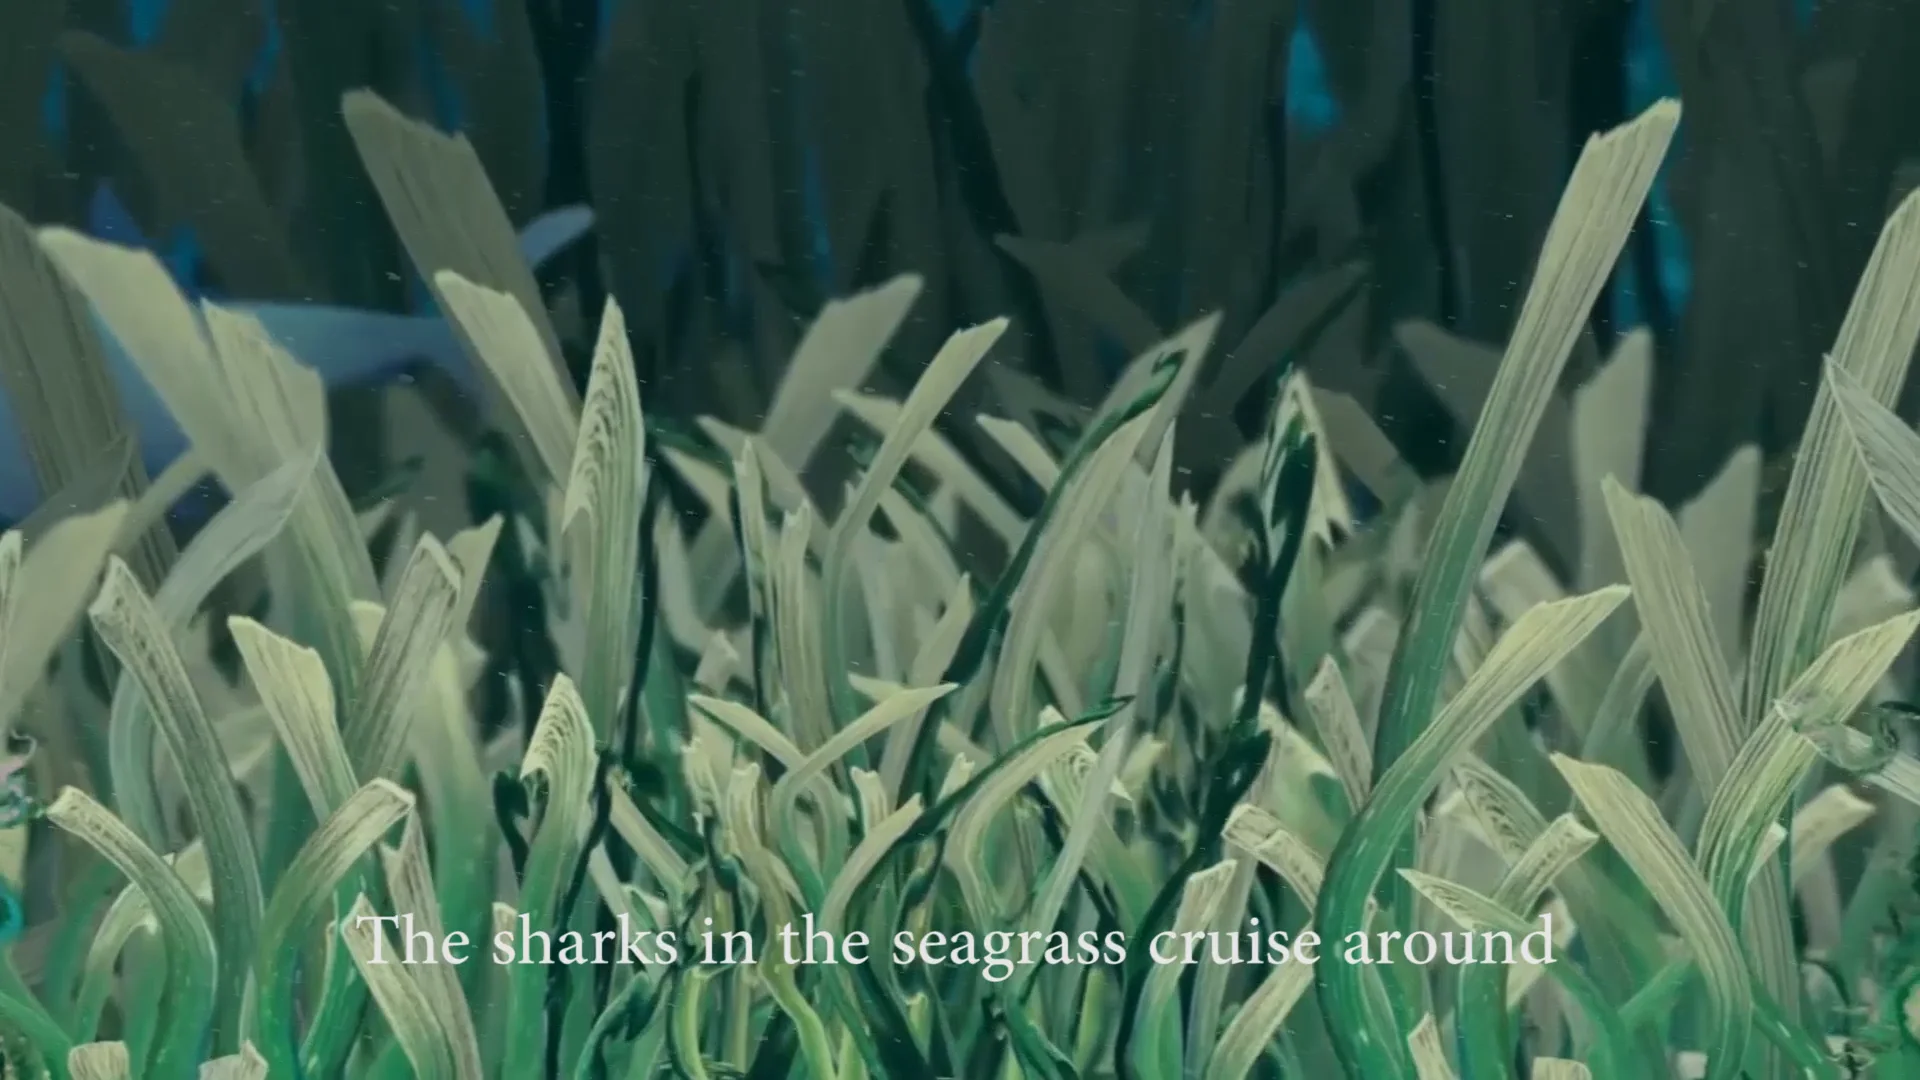 Song of the Seagrass